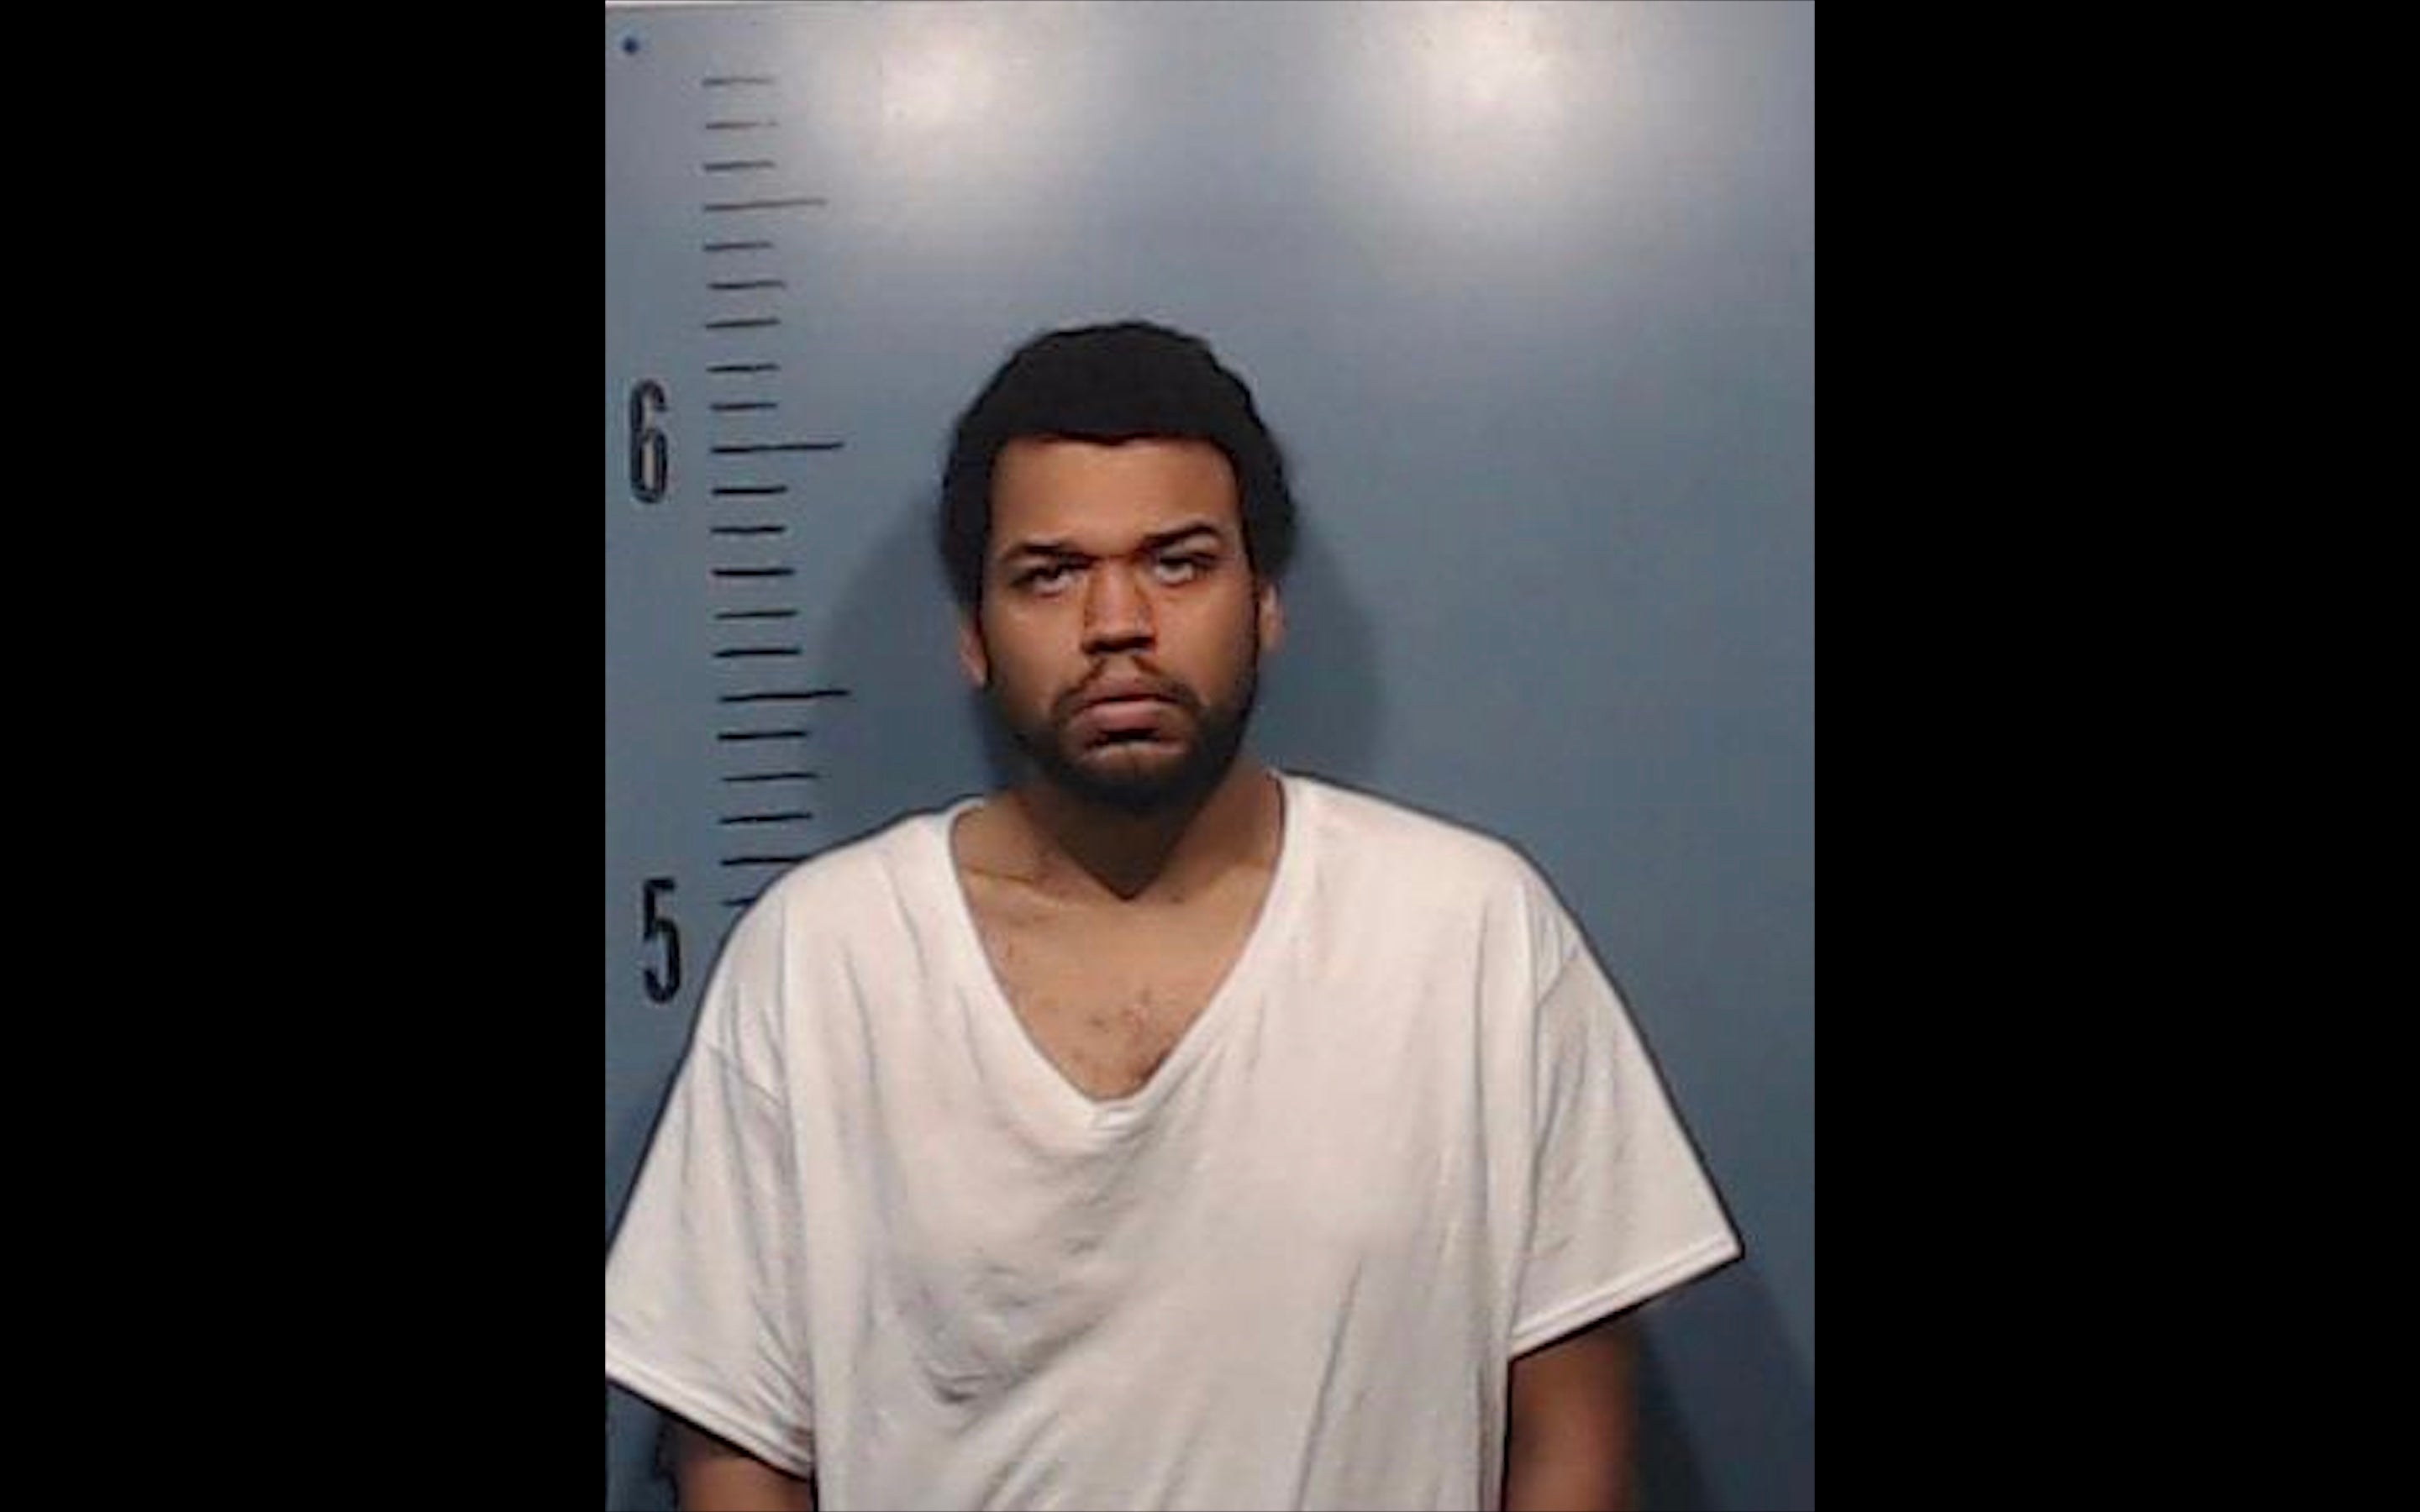 Alek Isaiah Collins, 26, has been arrested on charges of two counts of first-degree murder, first-degree kidnapping and two counts of child abuse